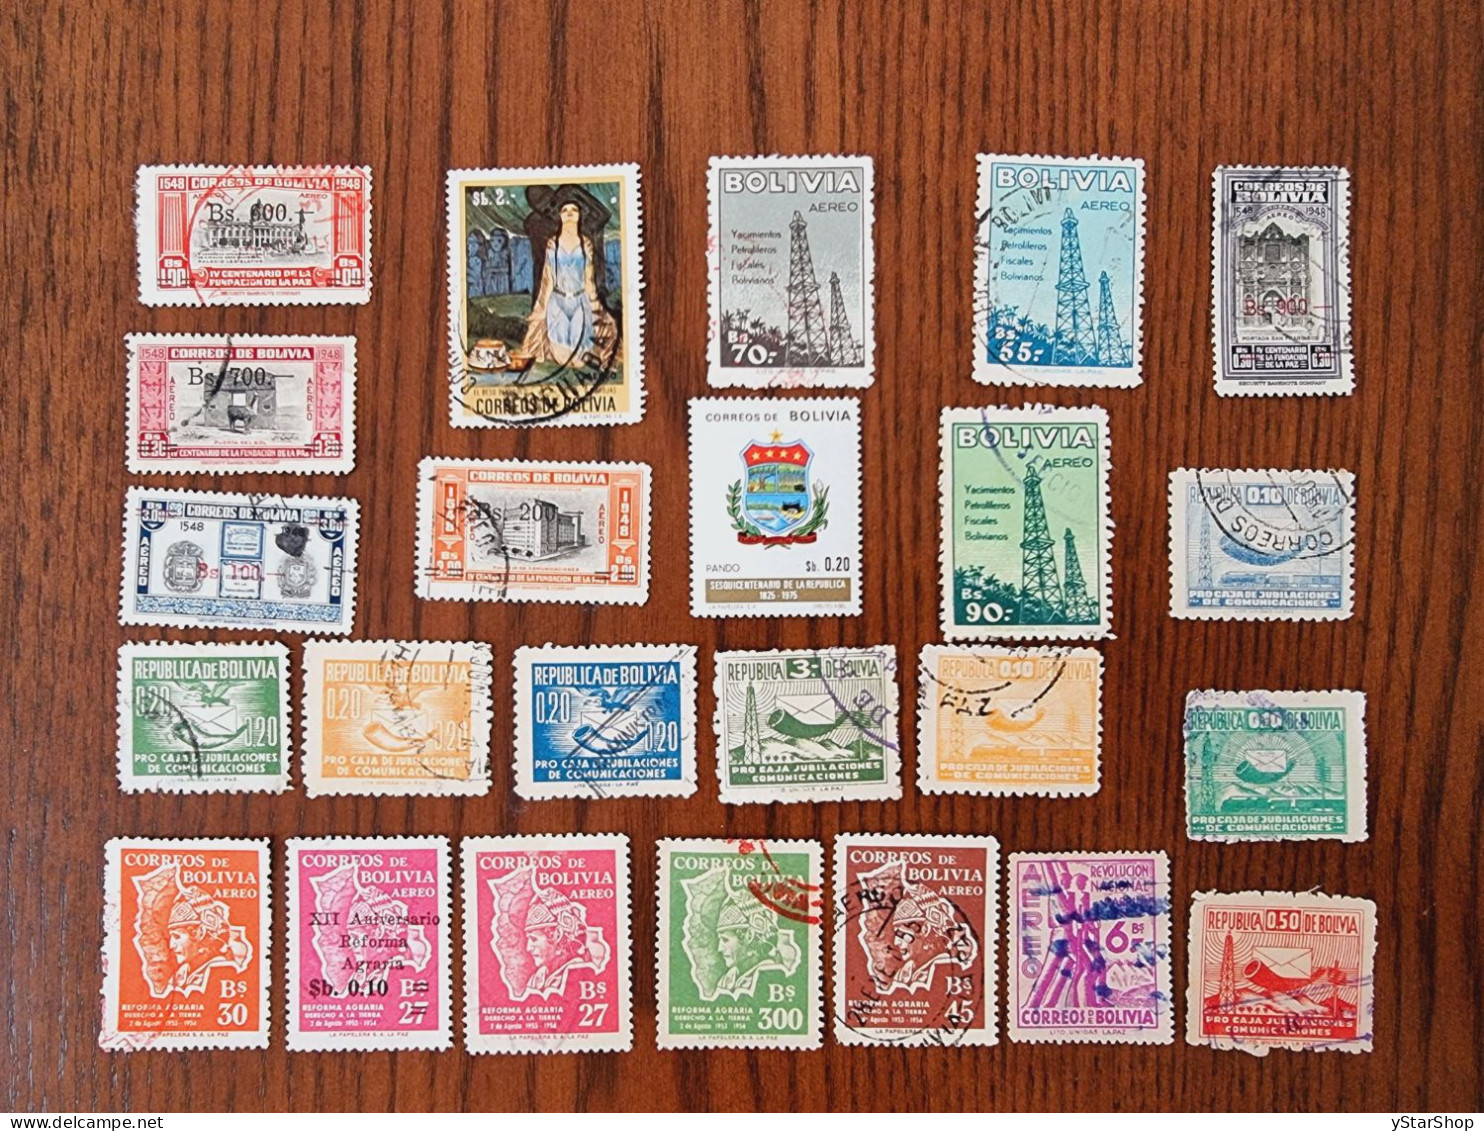 Bolivia Stamps Lot - Used - Various Themes - Bolivia